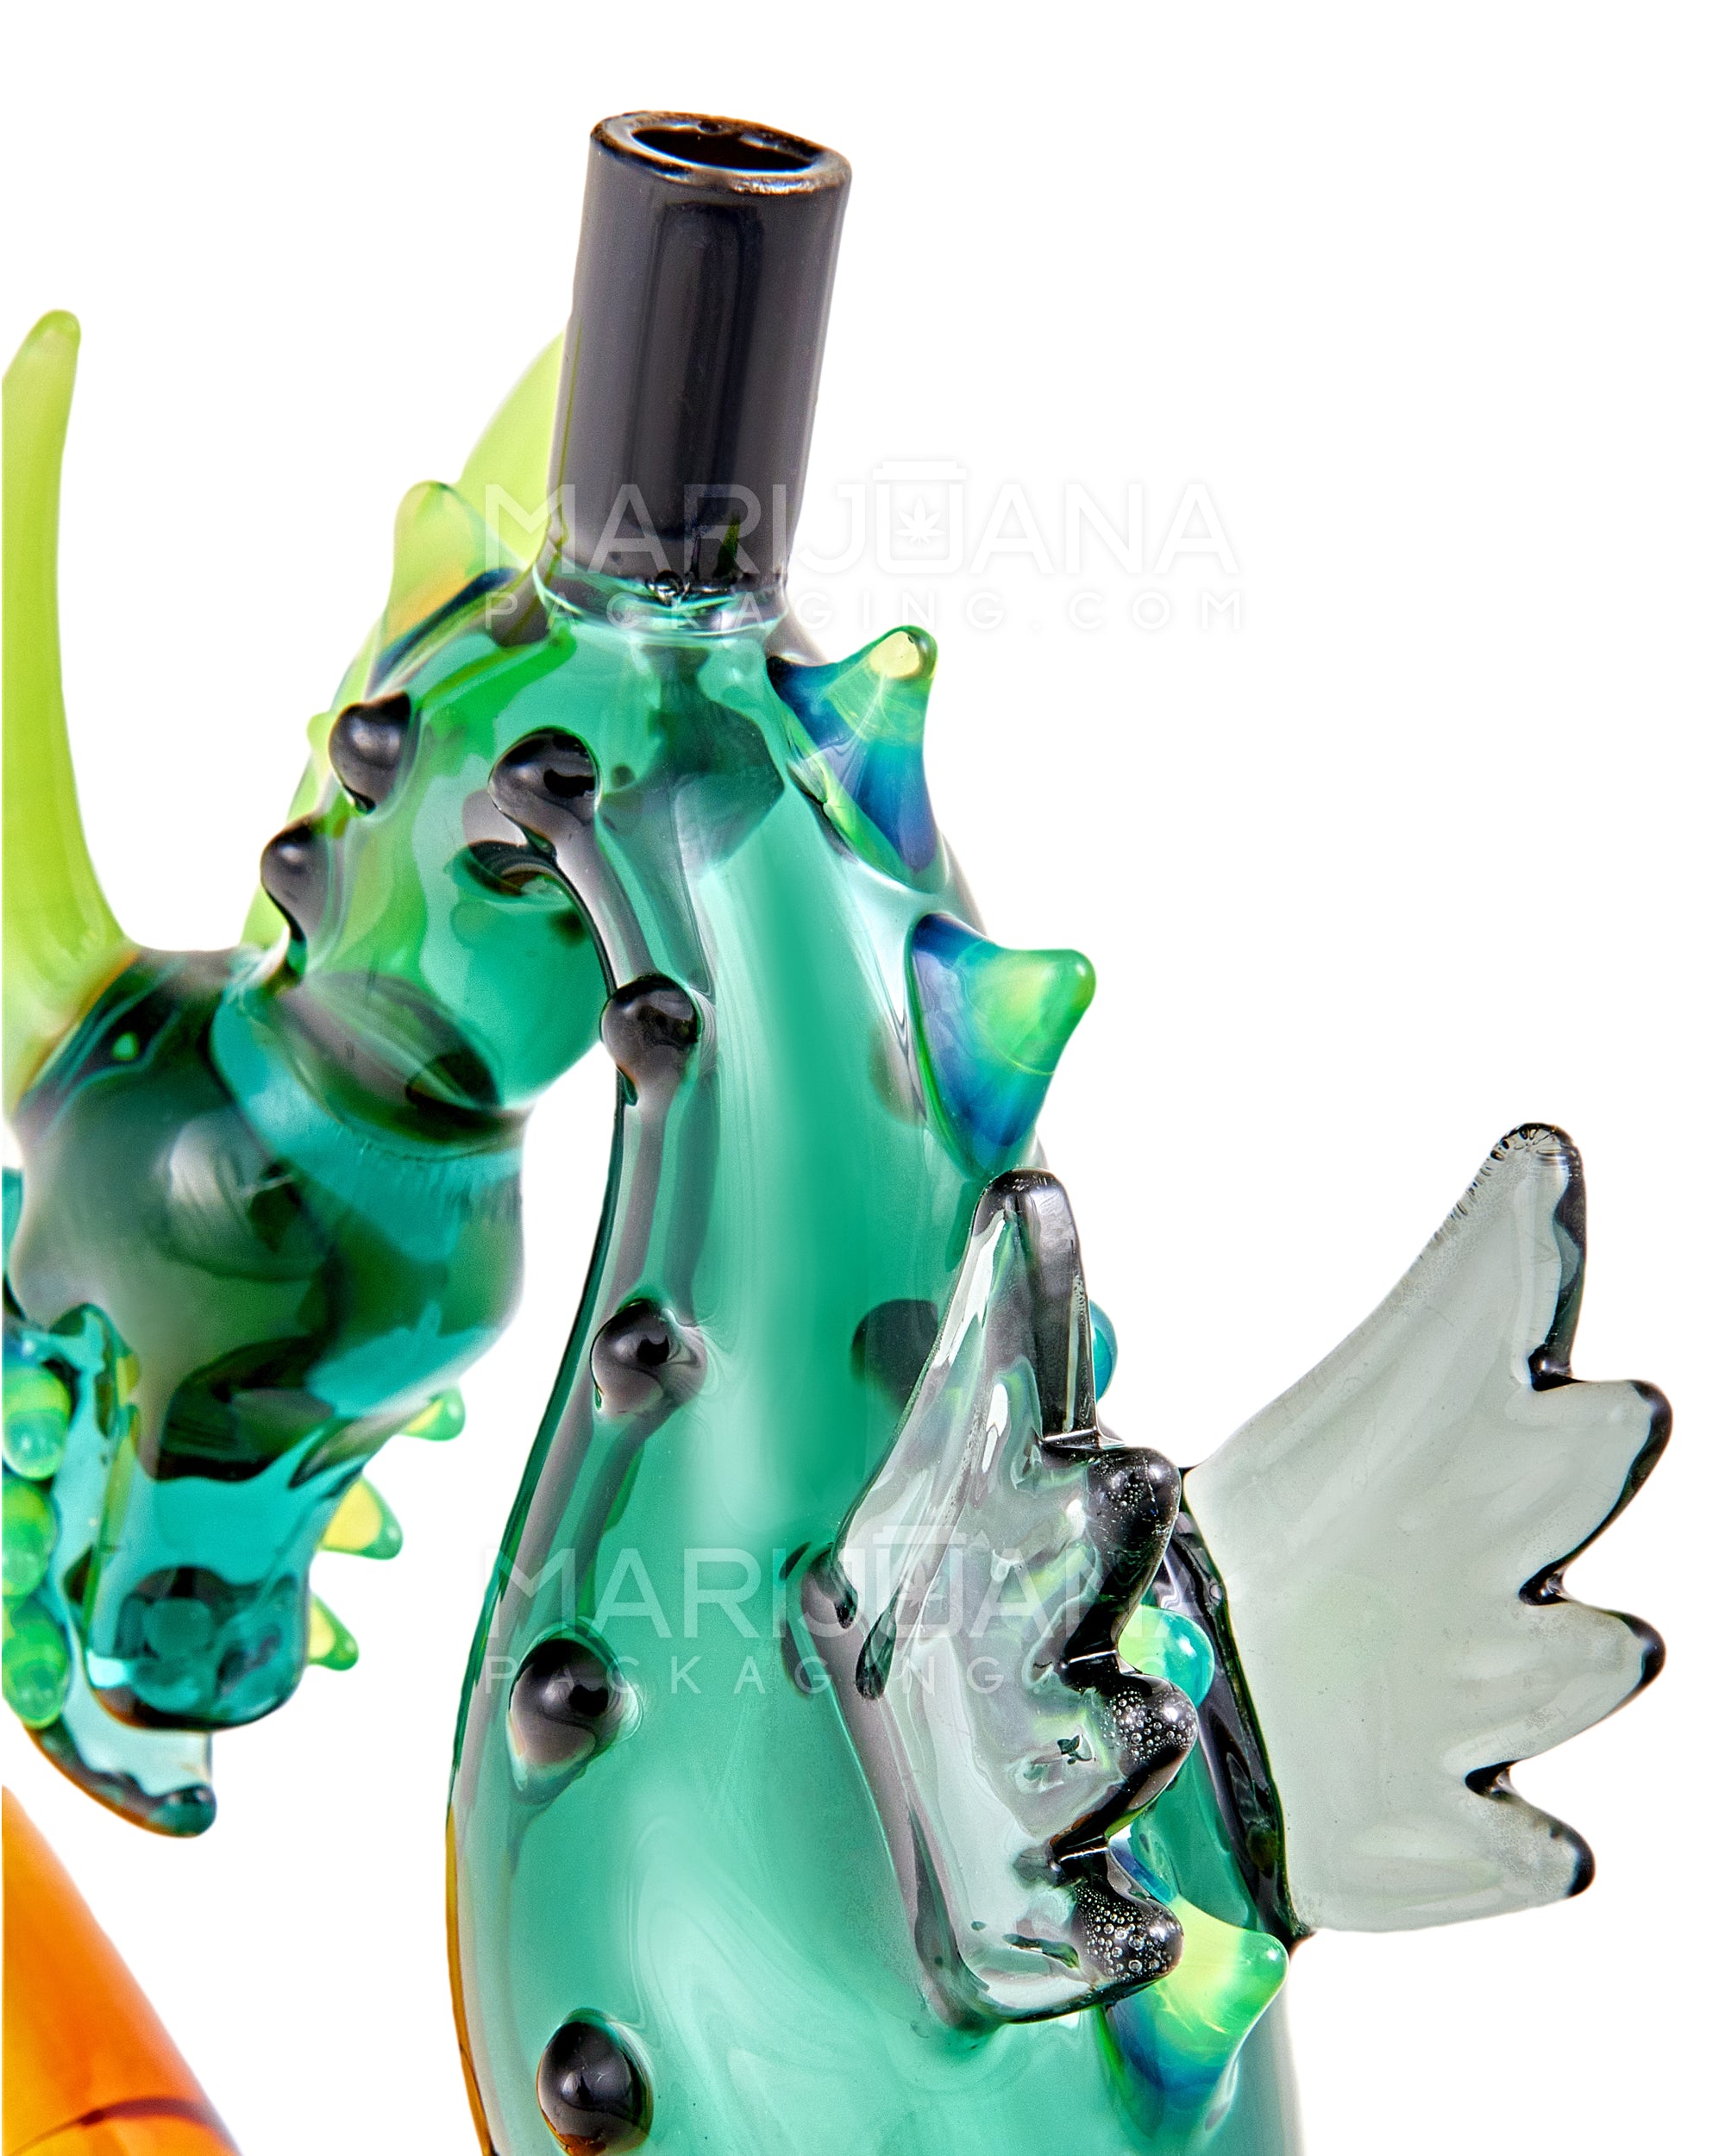 Heady | USA Glass Winged & Horned Glass Dragon Water Pipe w/ Multi Knockers | 7.5in Tall - 14mm Bowl - Teal & Amber - 5